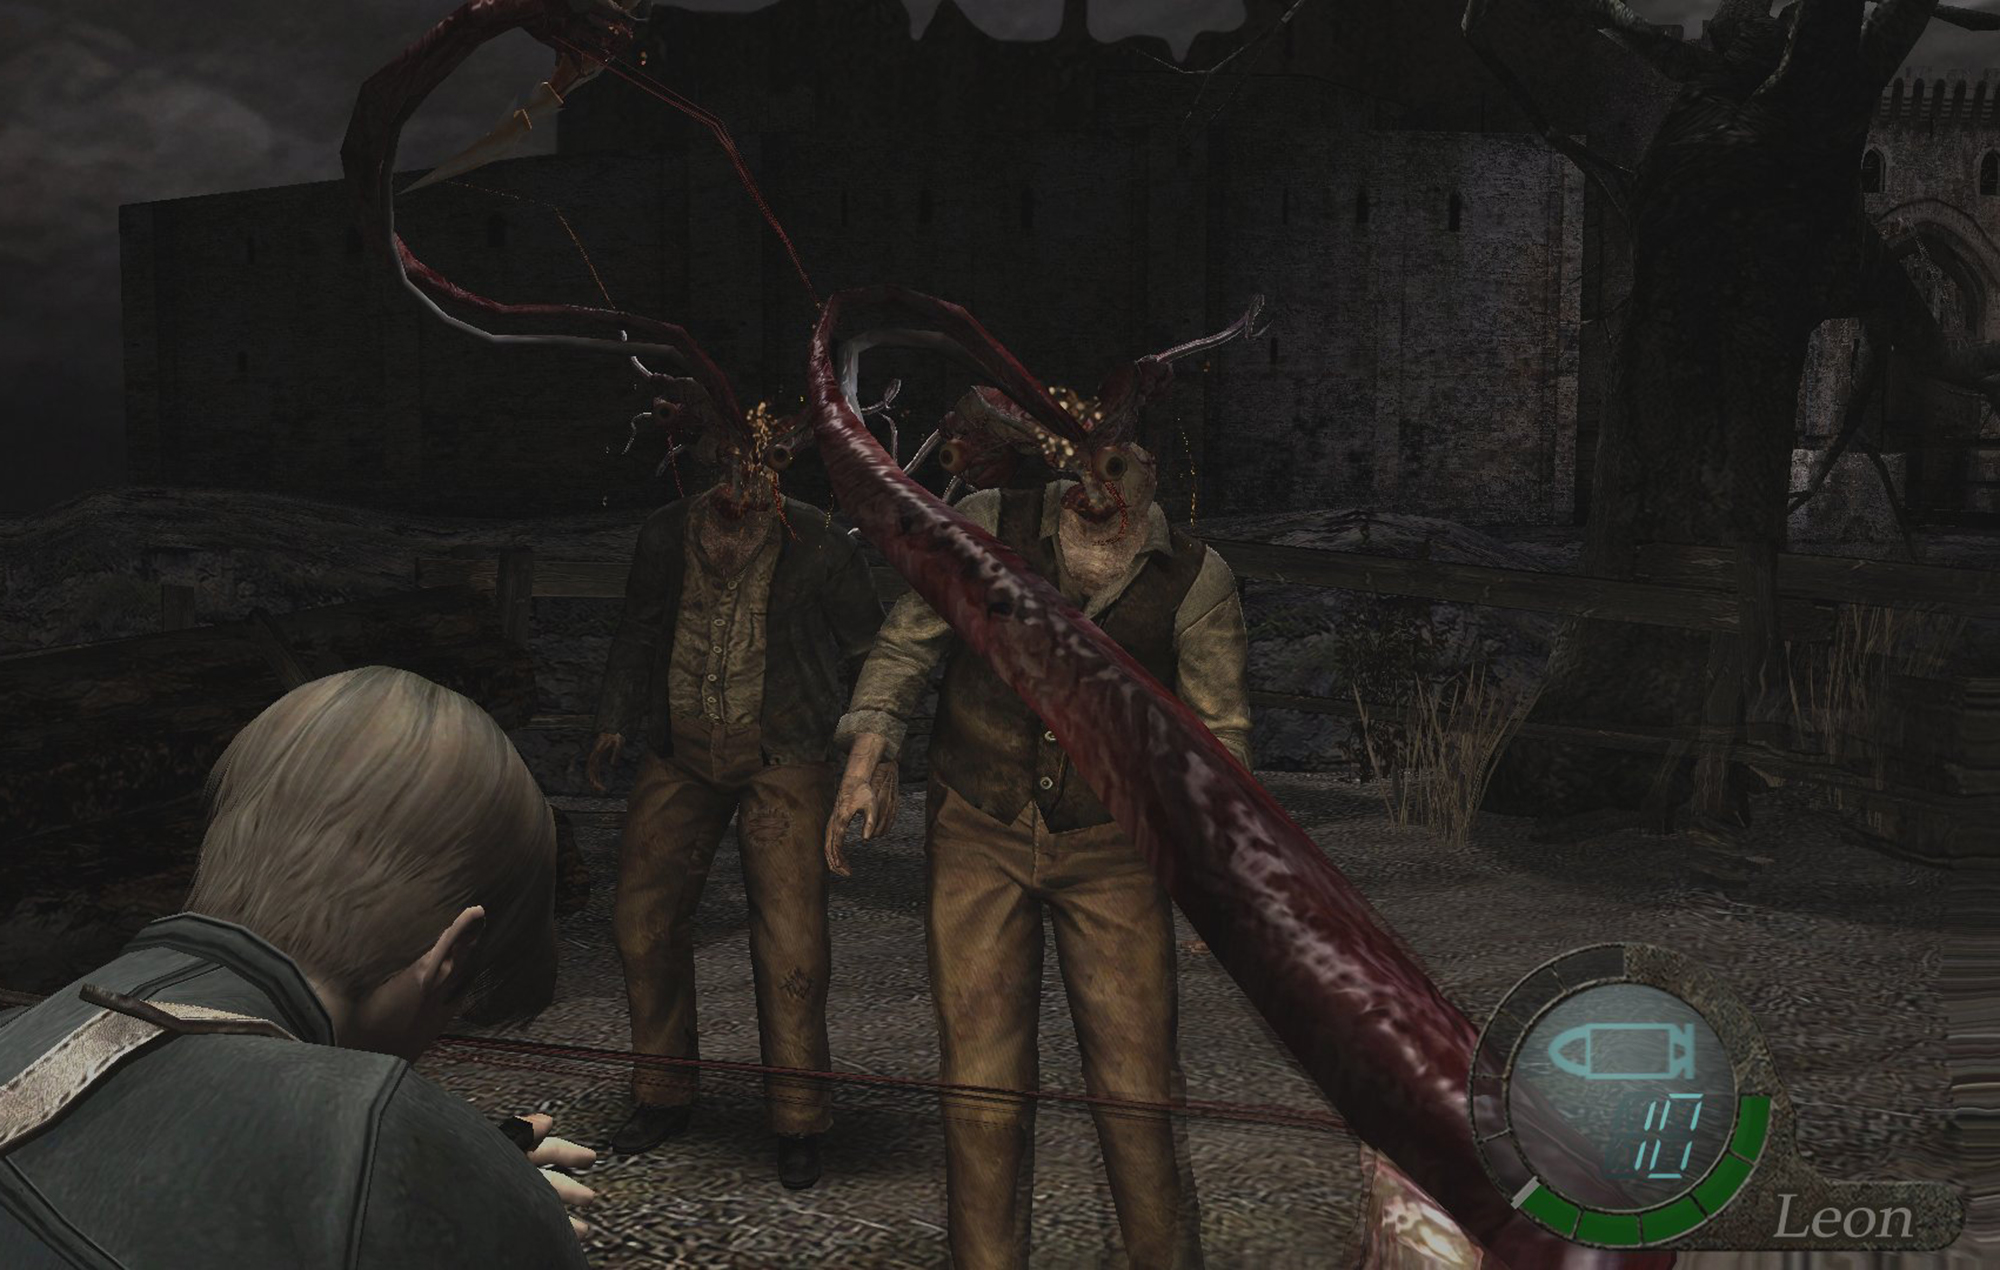 <strong><u><em>Resident Evil 4</em>: Not Zombies</u></strong>
</br>
</br>
The <em>Resident Evil</em> series conditioned players to expect hordes of shambling zombies in every game.
</br>
</br>
But in <em>Resident Evil 4</em>, the traditional zombies have been replaced by infected villagers.
</br>
</br>
Not only are they faster than zombies, but these villagers turn into deadly Lovecraftian monsters after taking a bit of damage.